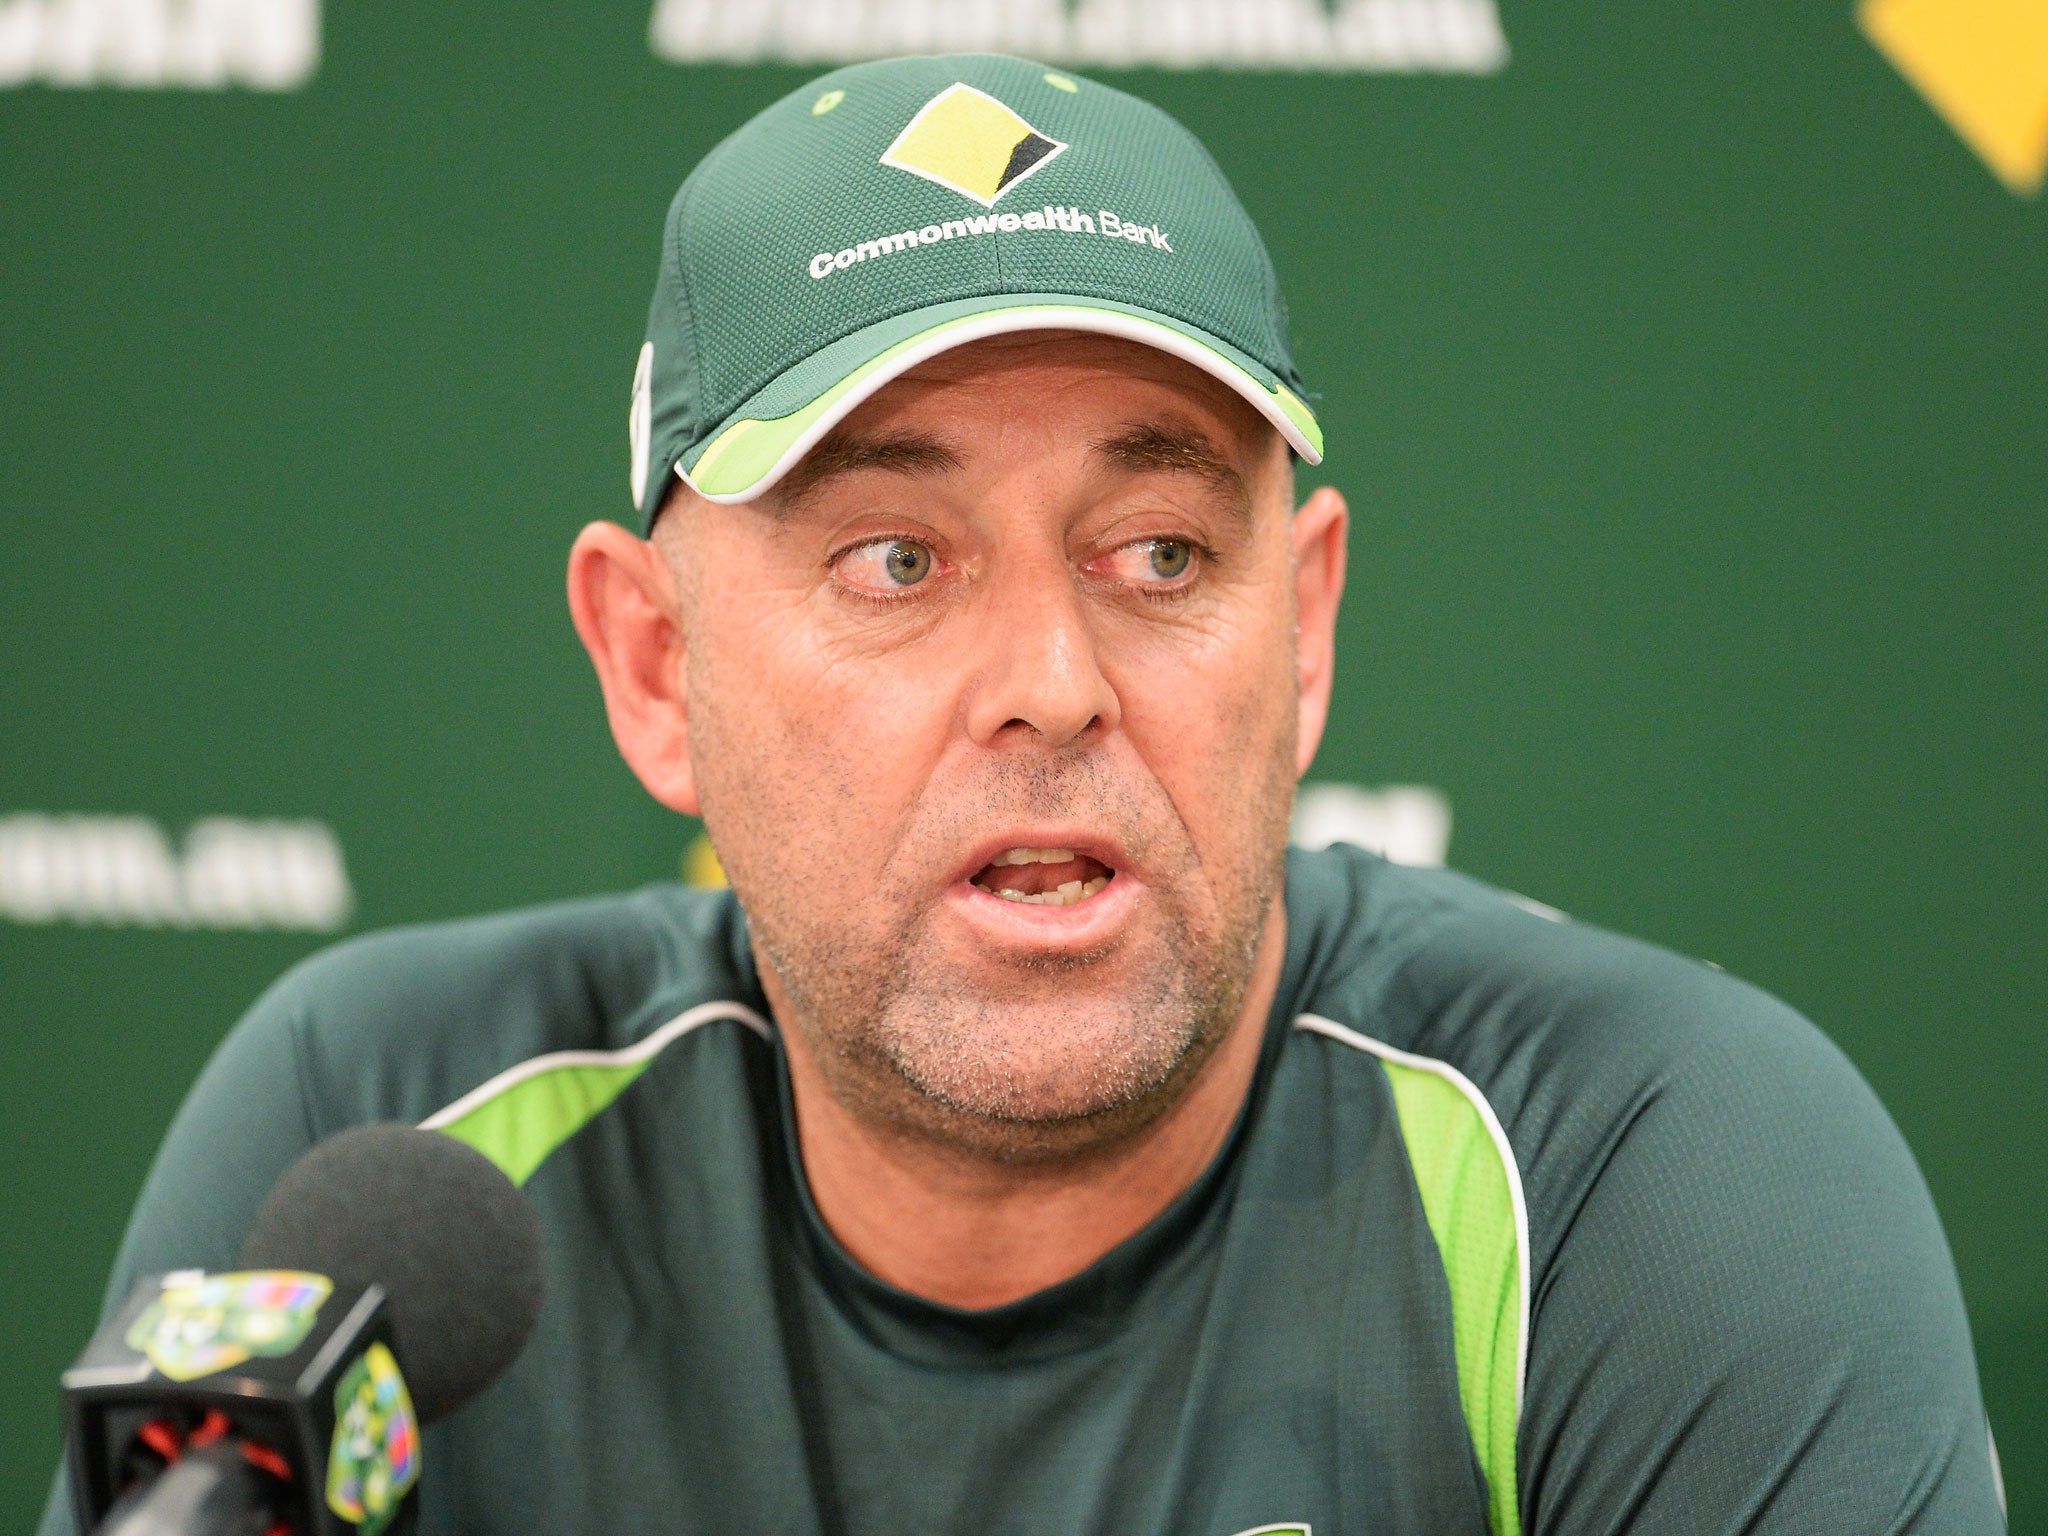 Australia coach Darren Lehmann has refused to comment on the Kevin Pietersen debacle as England's calamitous series continues